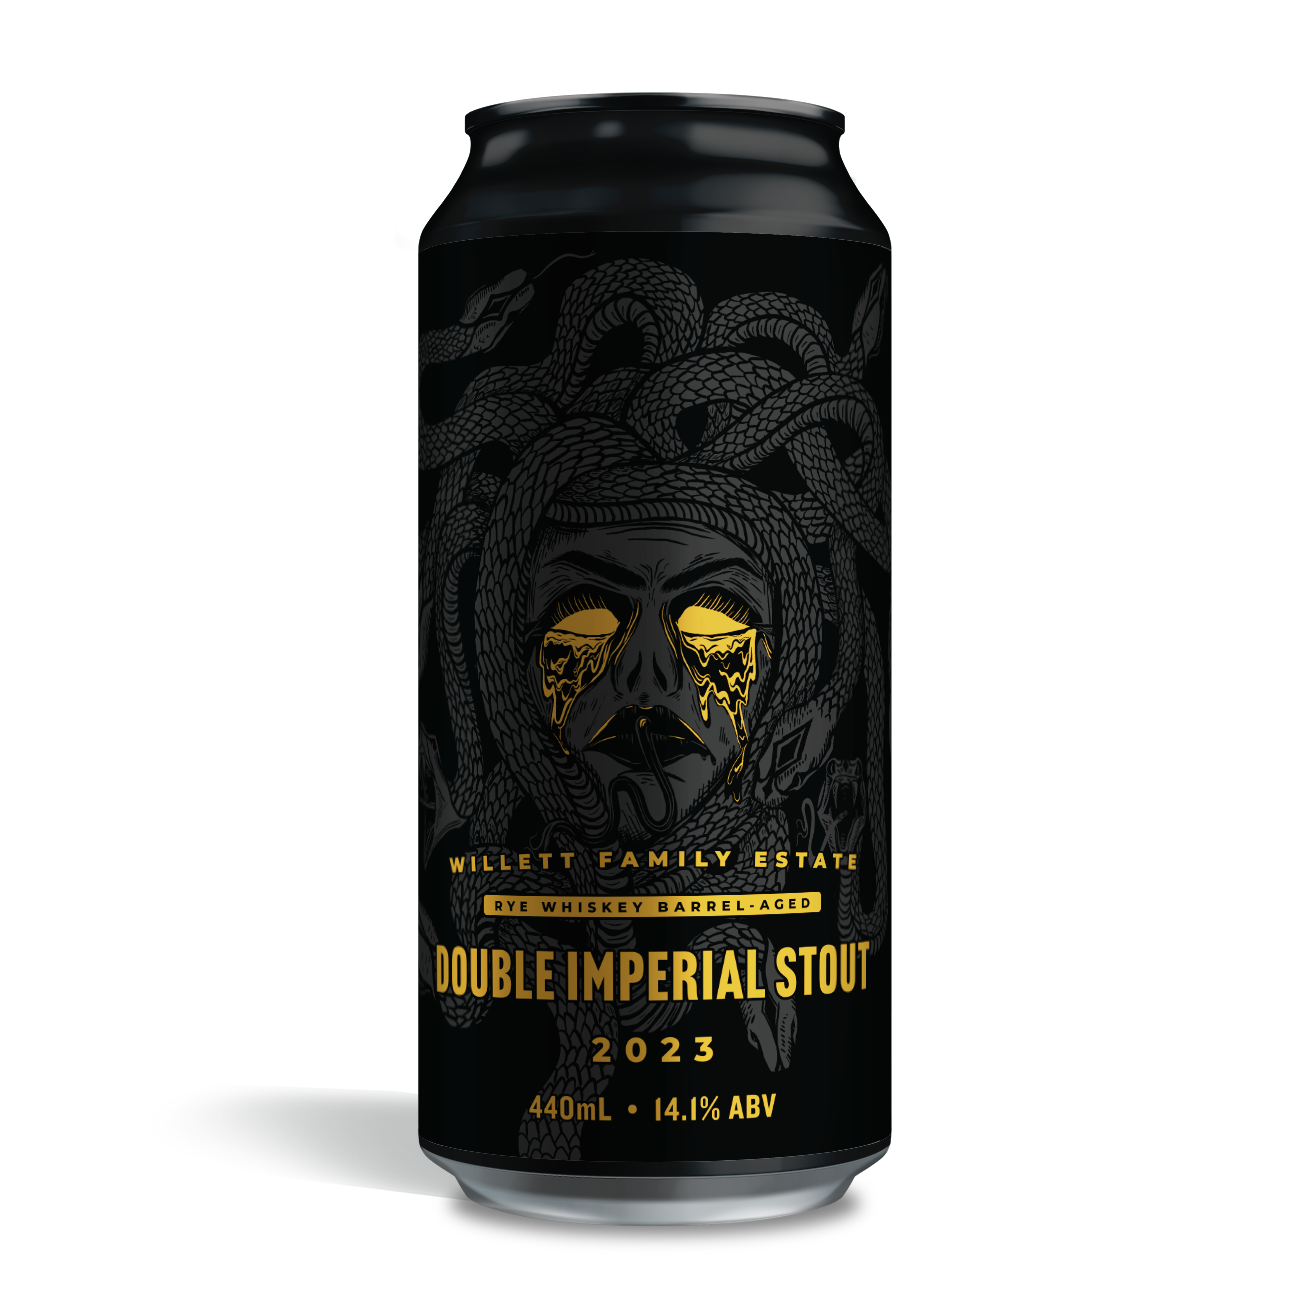 Willett Family Estate Rye Whiskey Barrel Aged Double Imperial Stout (2023)